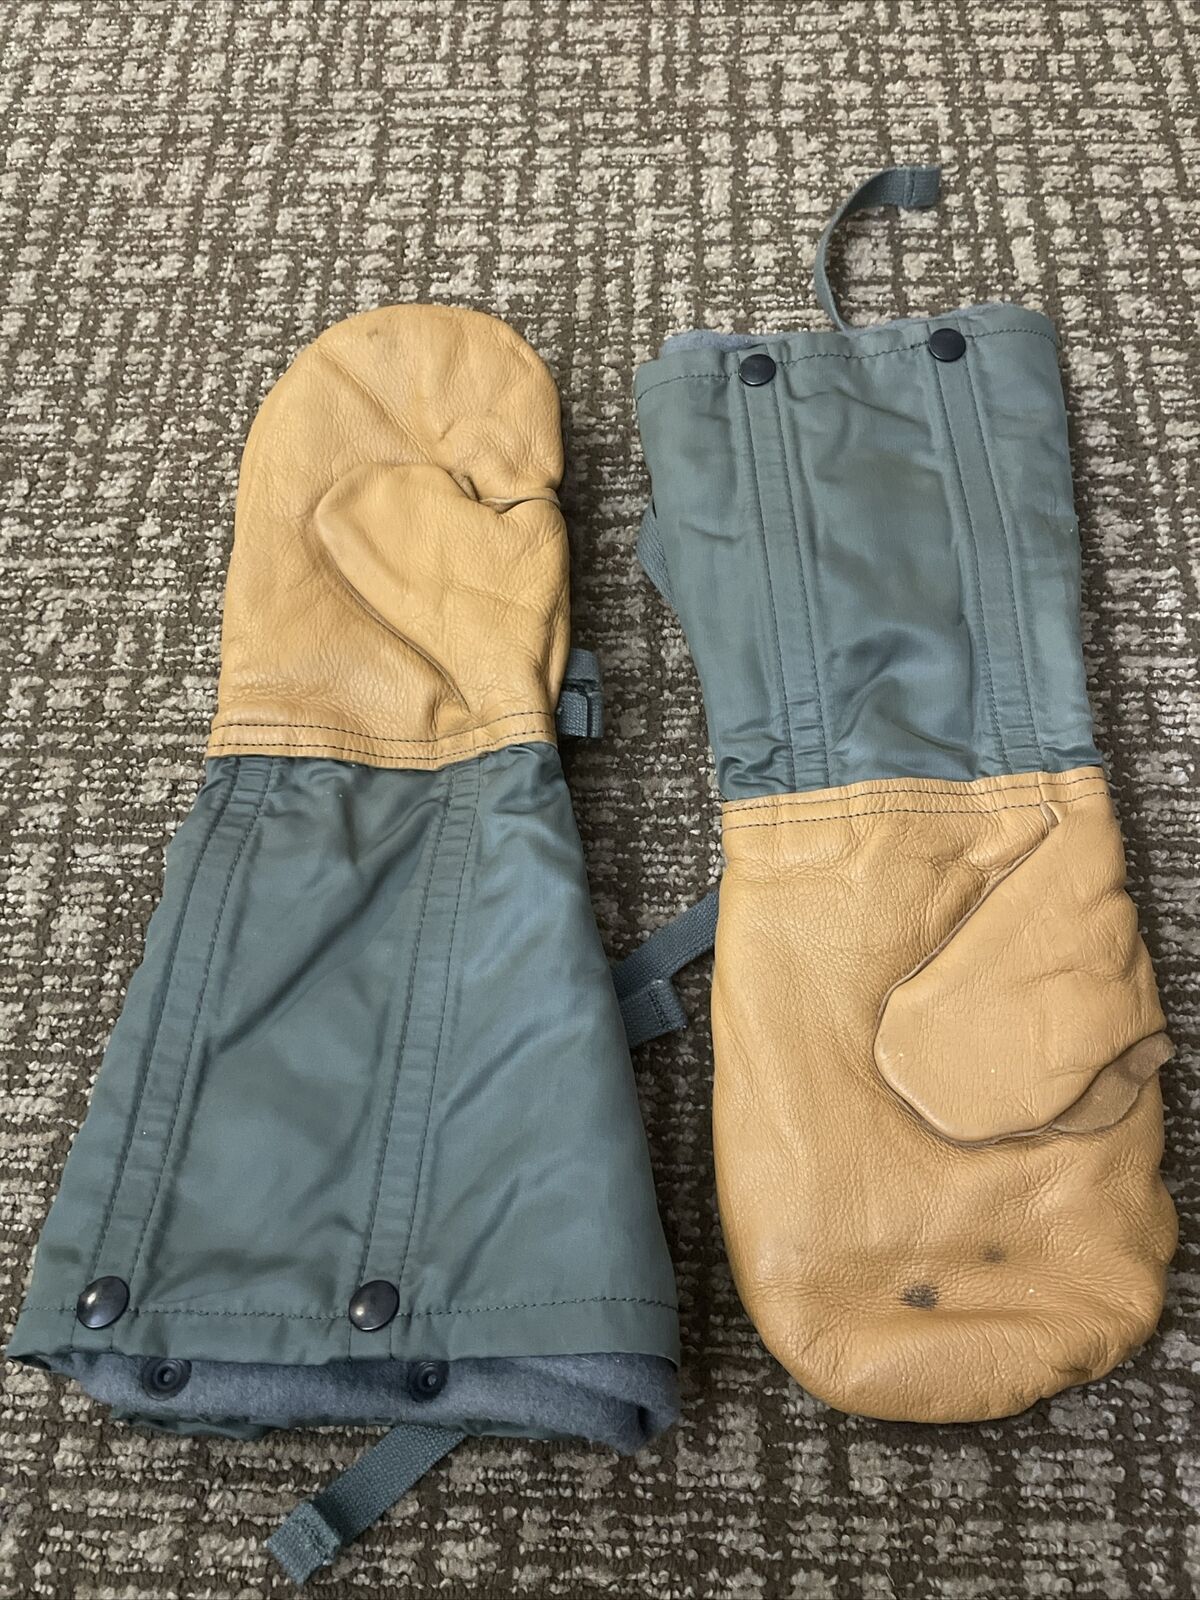 Military  Extreme Cold Weather Arctic Mittens Wool Insert Flying  M medium N-4B